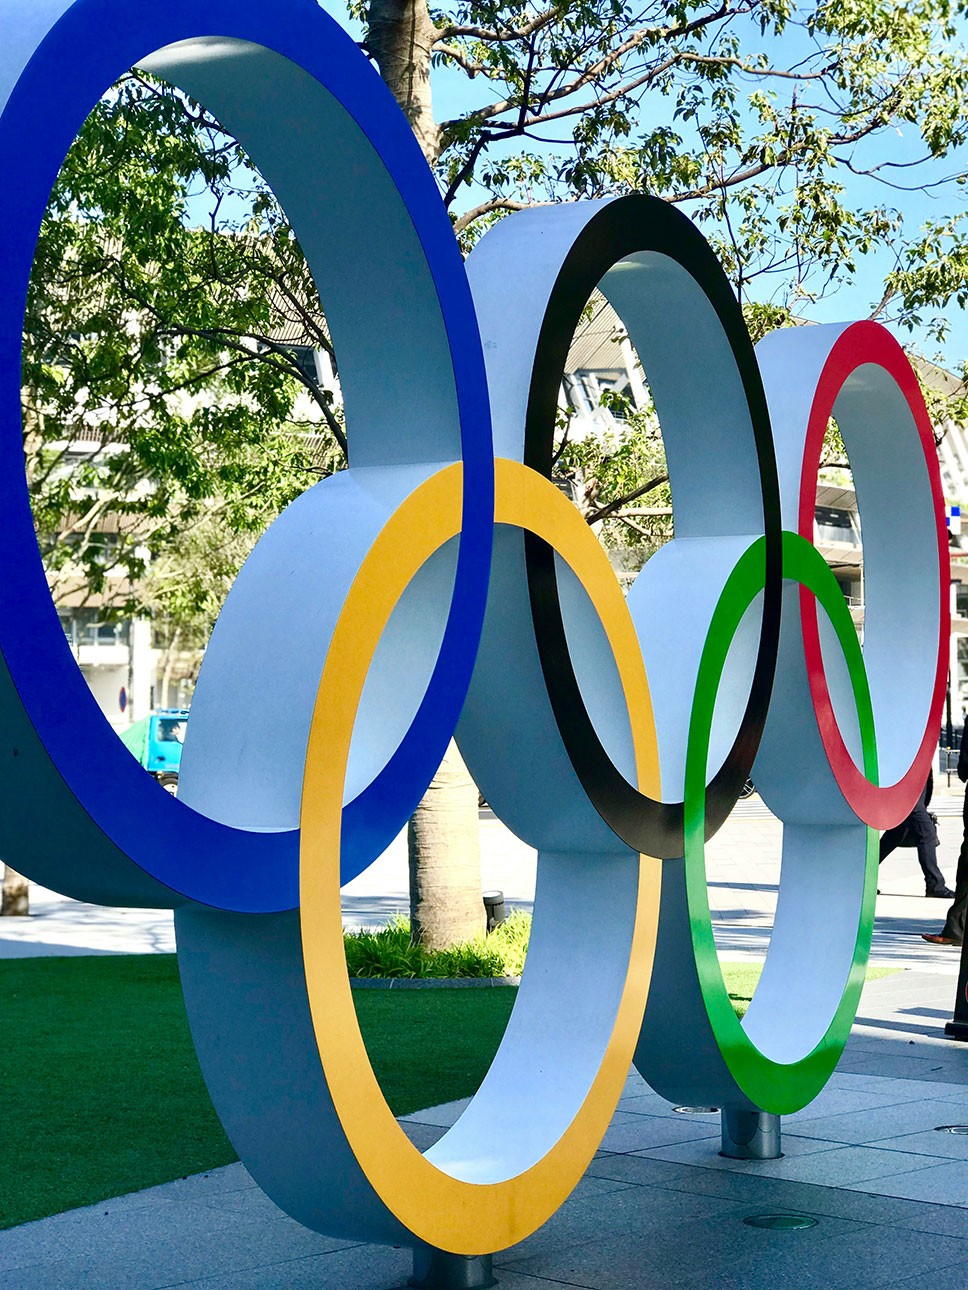 Paris 2024 Olympics: Dates, Location, and Event Highlights